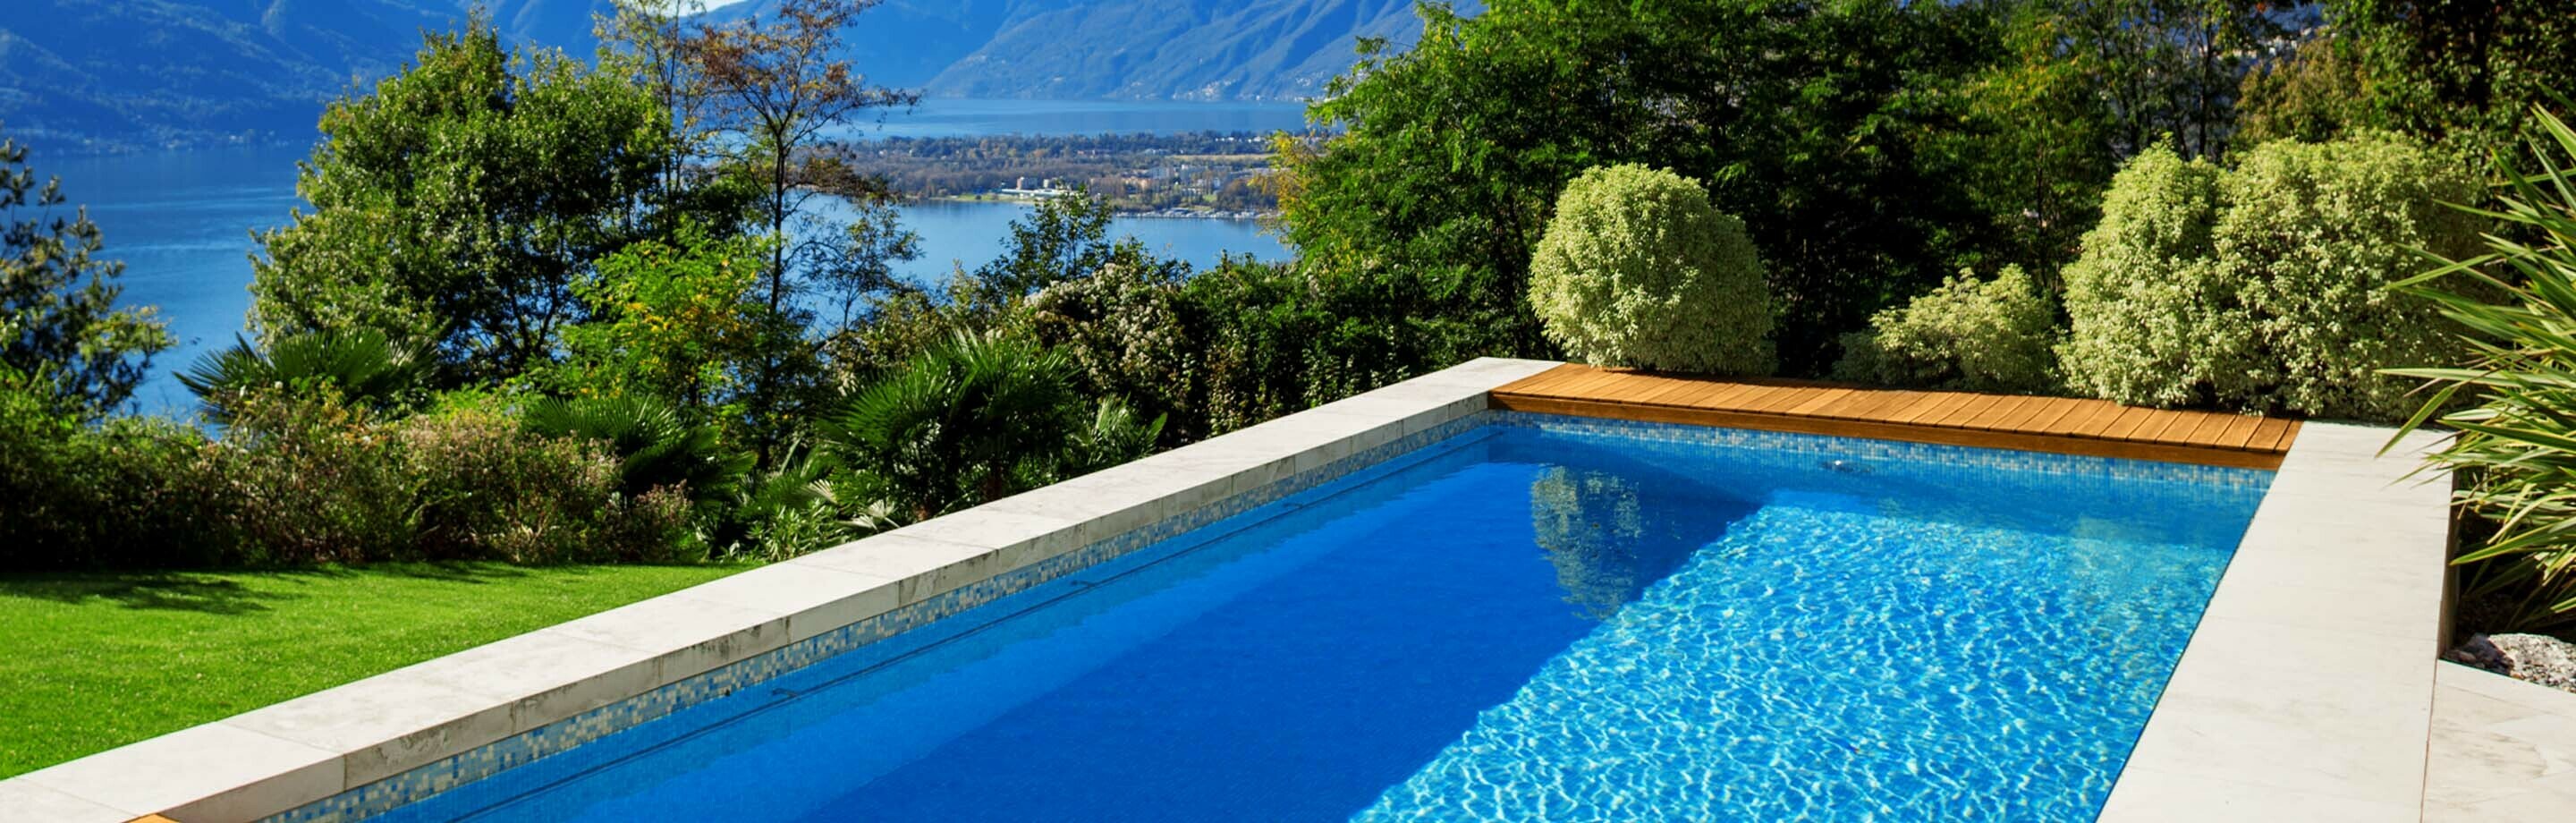 Home Page Main Image Dantherm outdoor pool